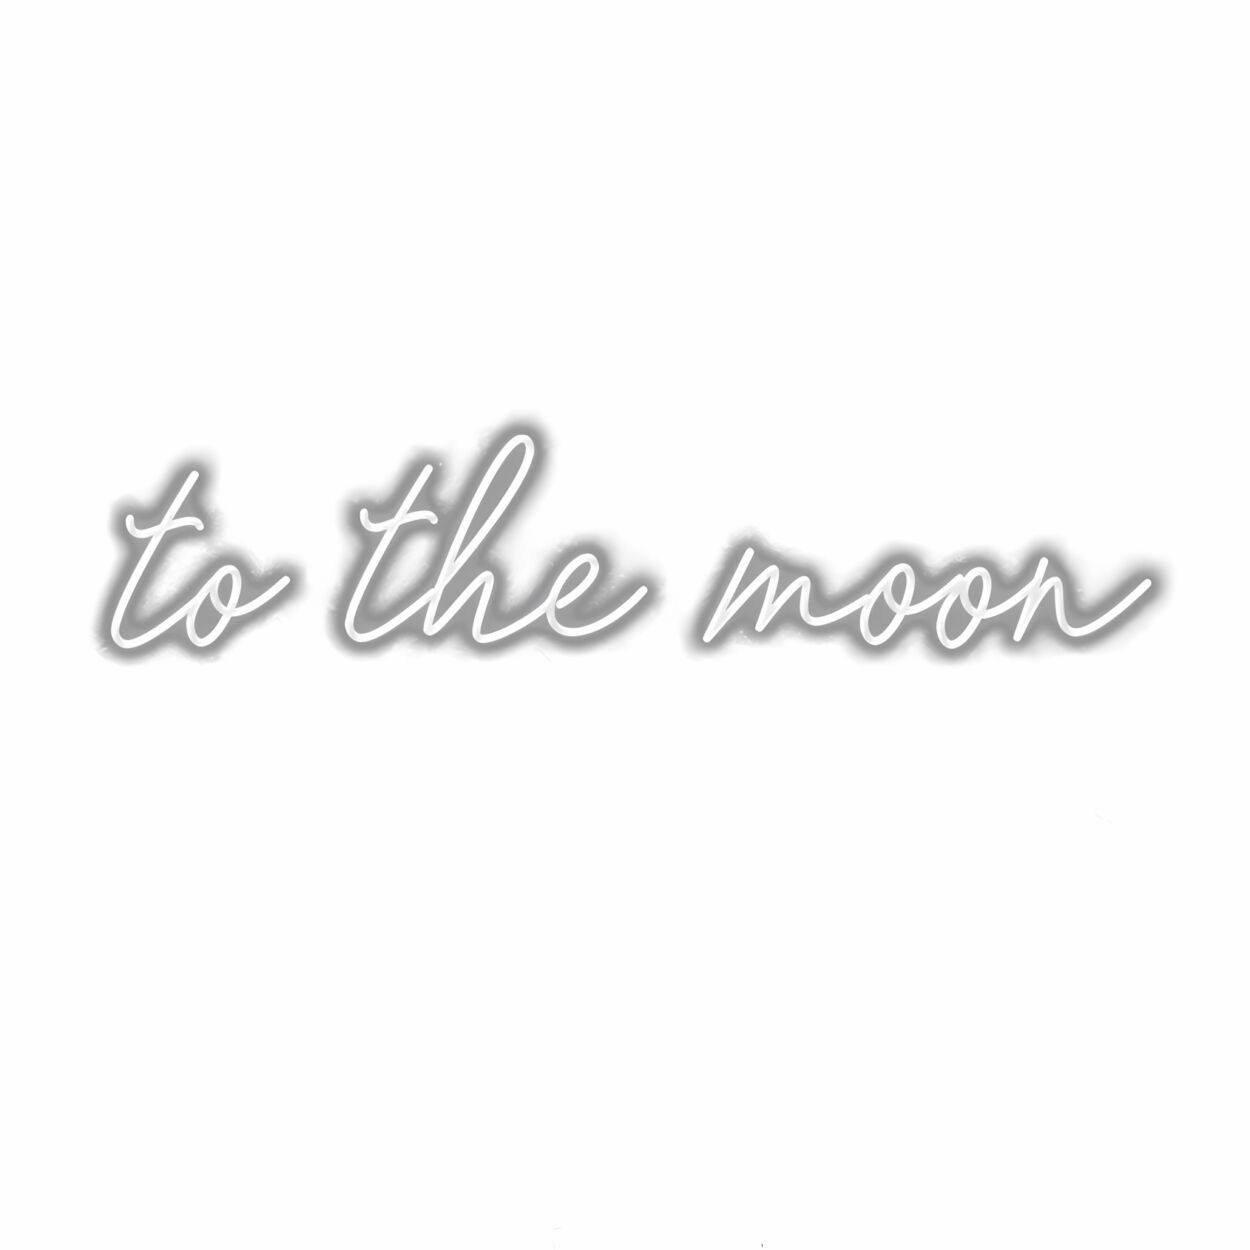 Cursive text saying "to the moon" shadow on white.